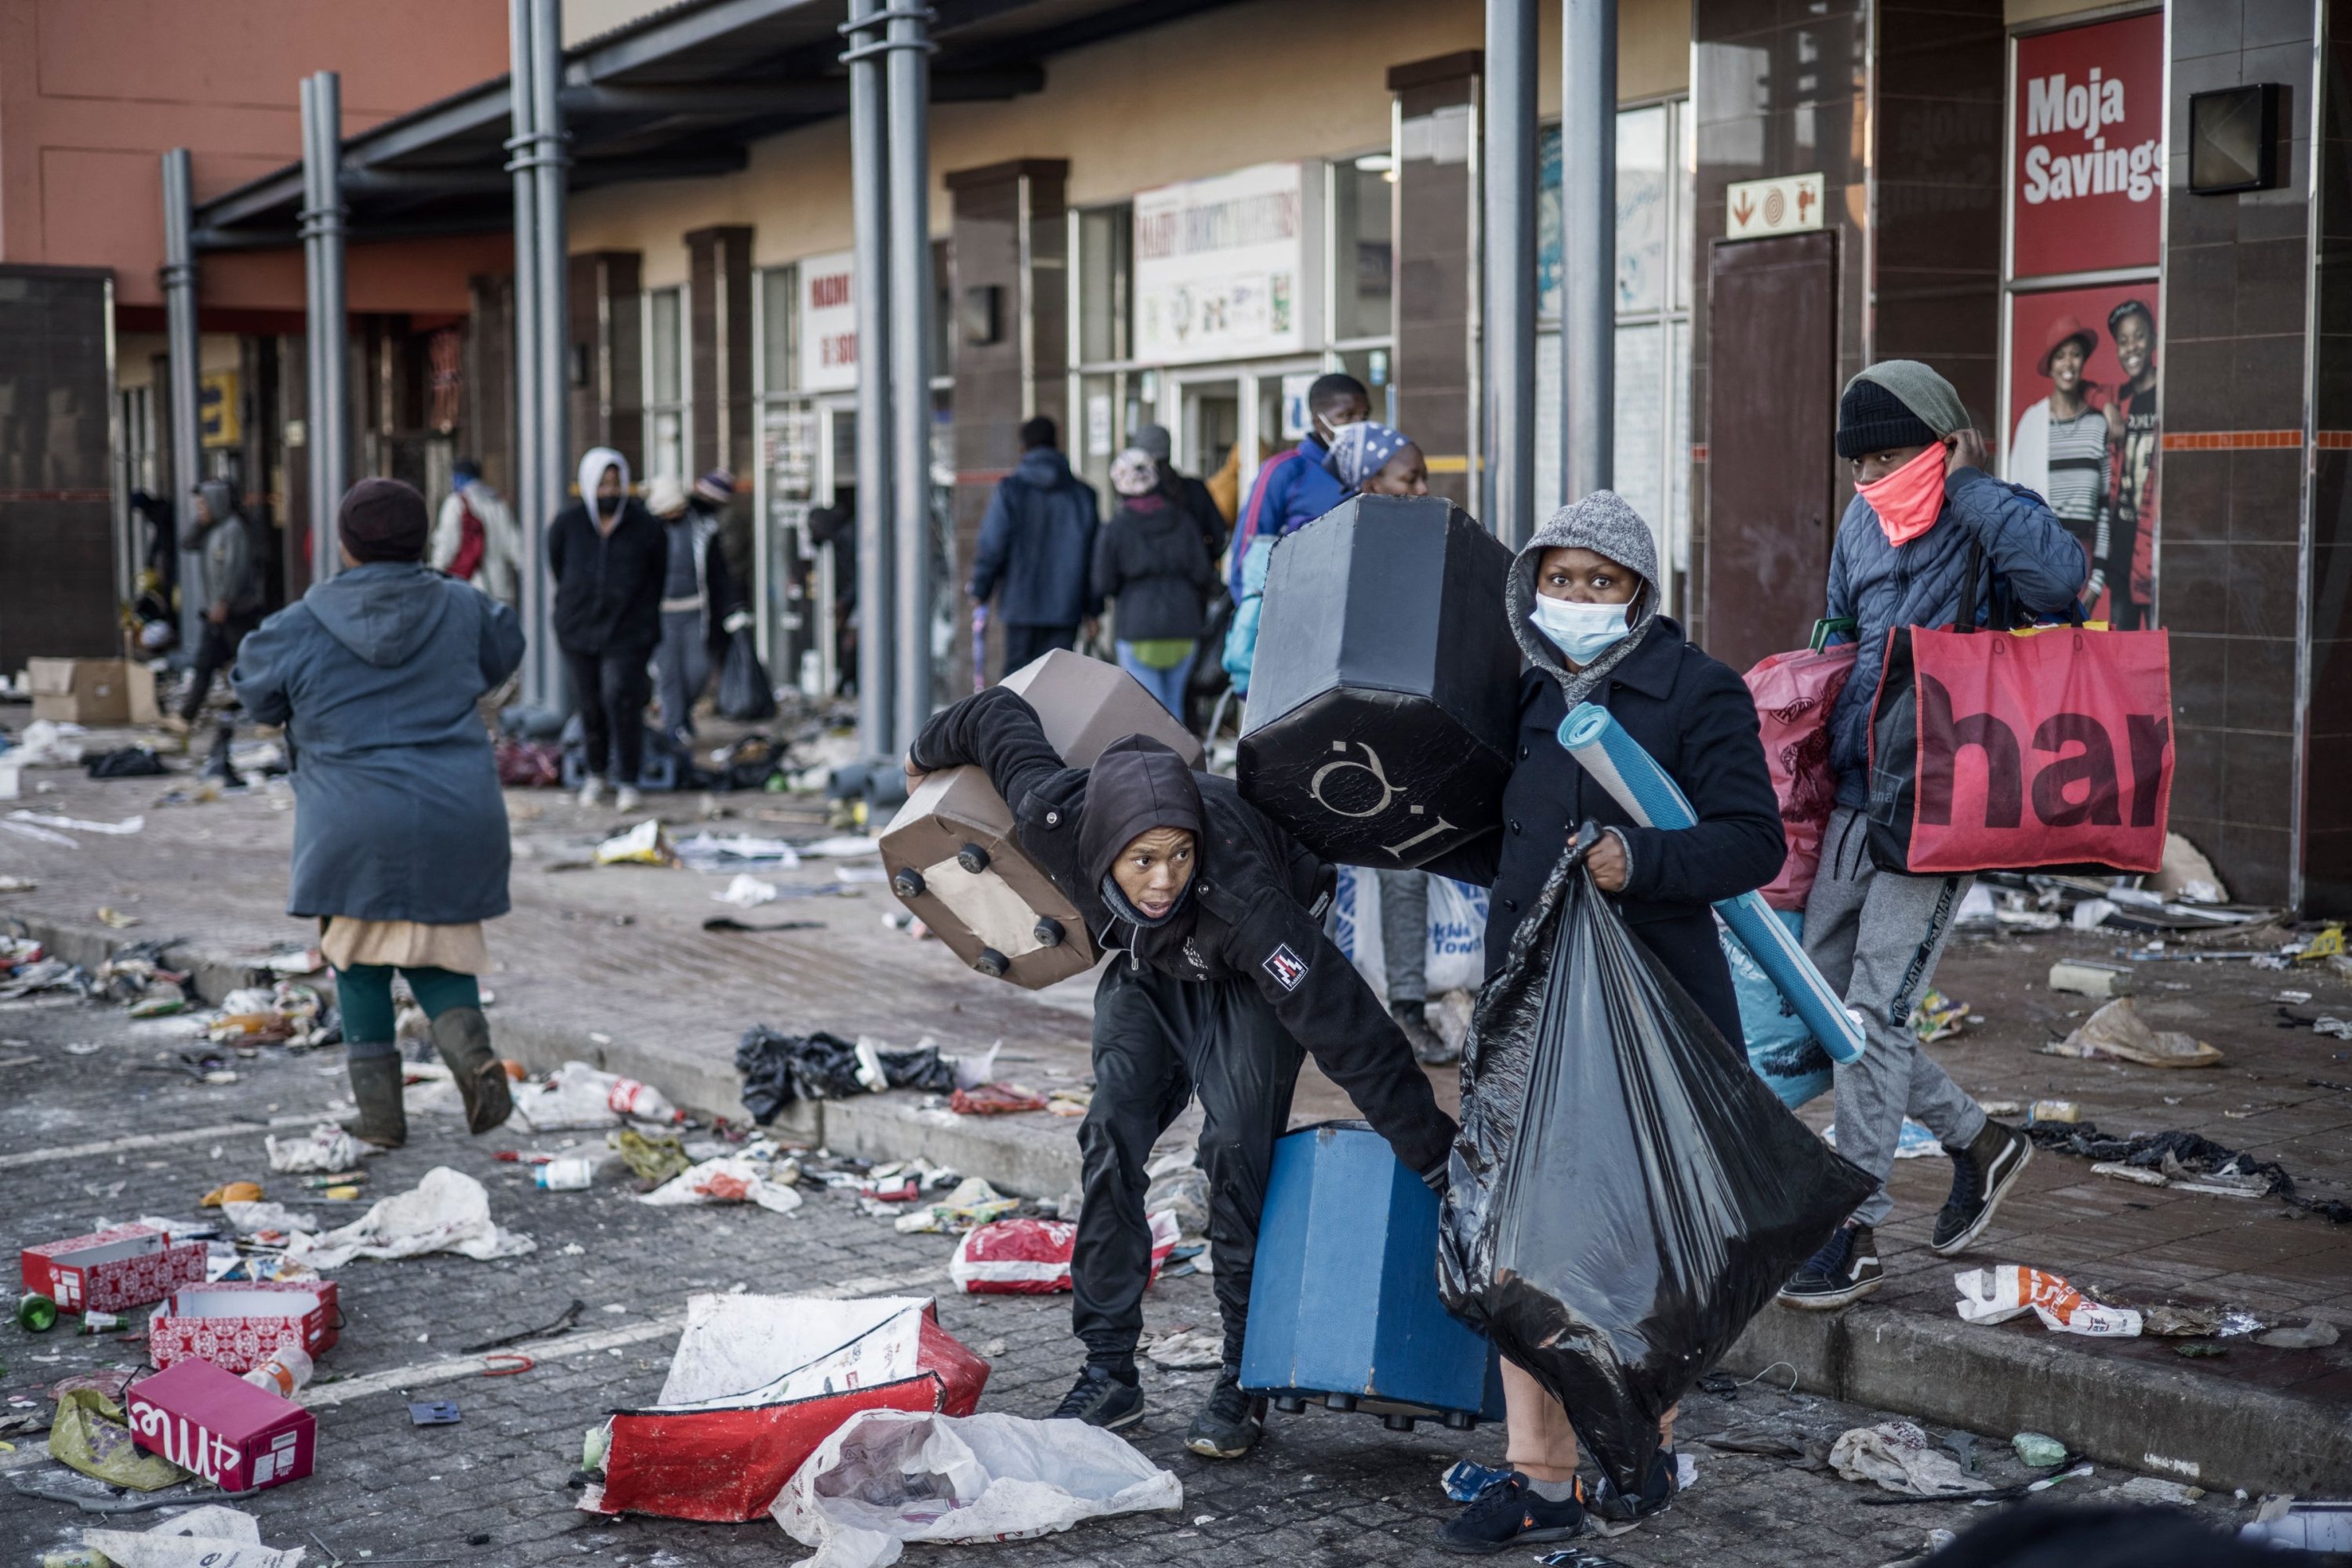 Looters take away the few items left to grab in a vandalized mall in Vosloorus, South Africa, July 14, 2021. (AFP Photo)